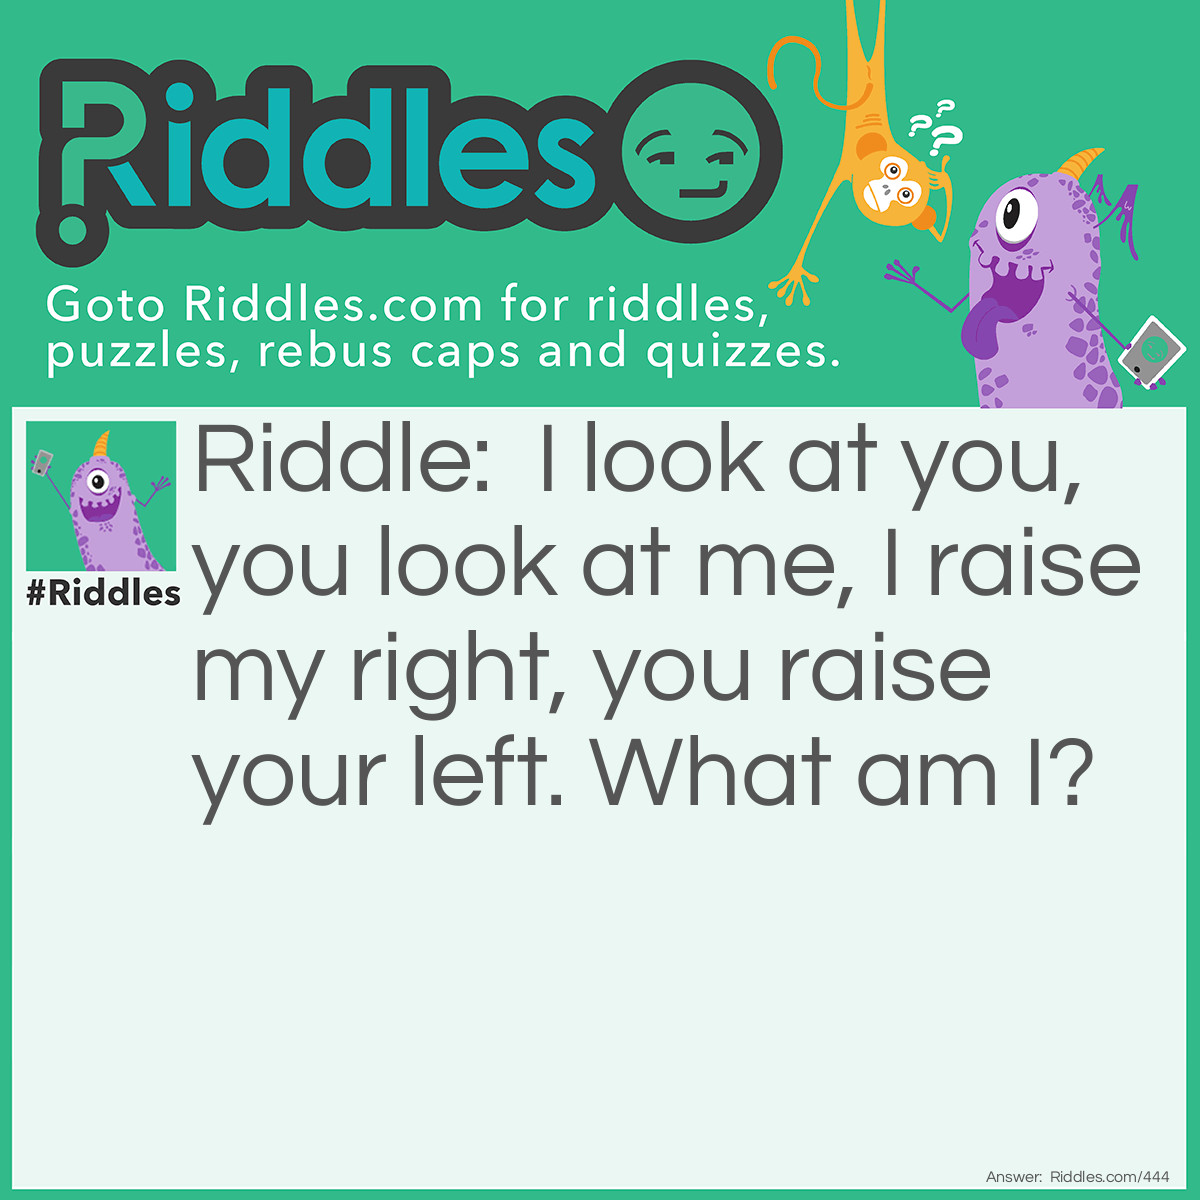 Riddle: I look at you, you look at me, I raise my right, you raise your left. What am I? Answer: Your reflection in a mirror.